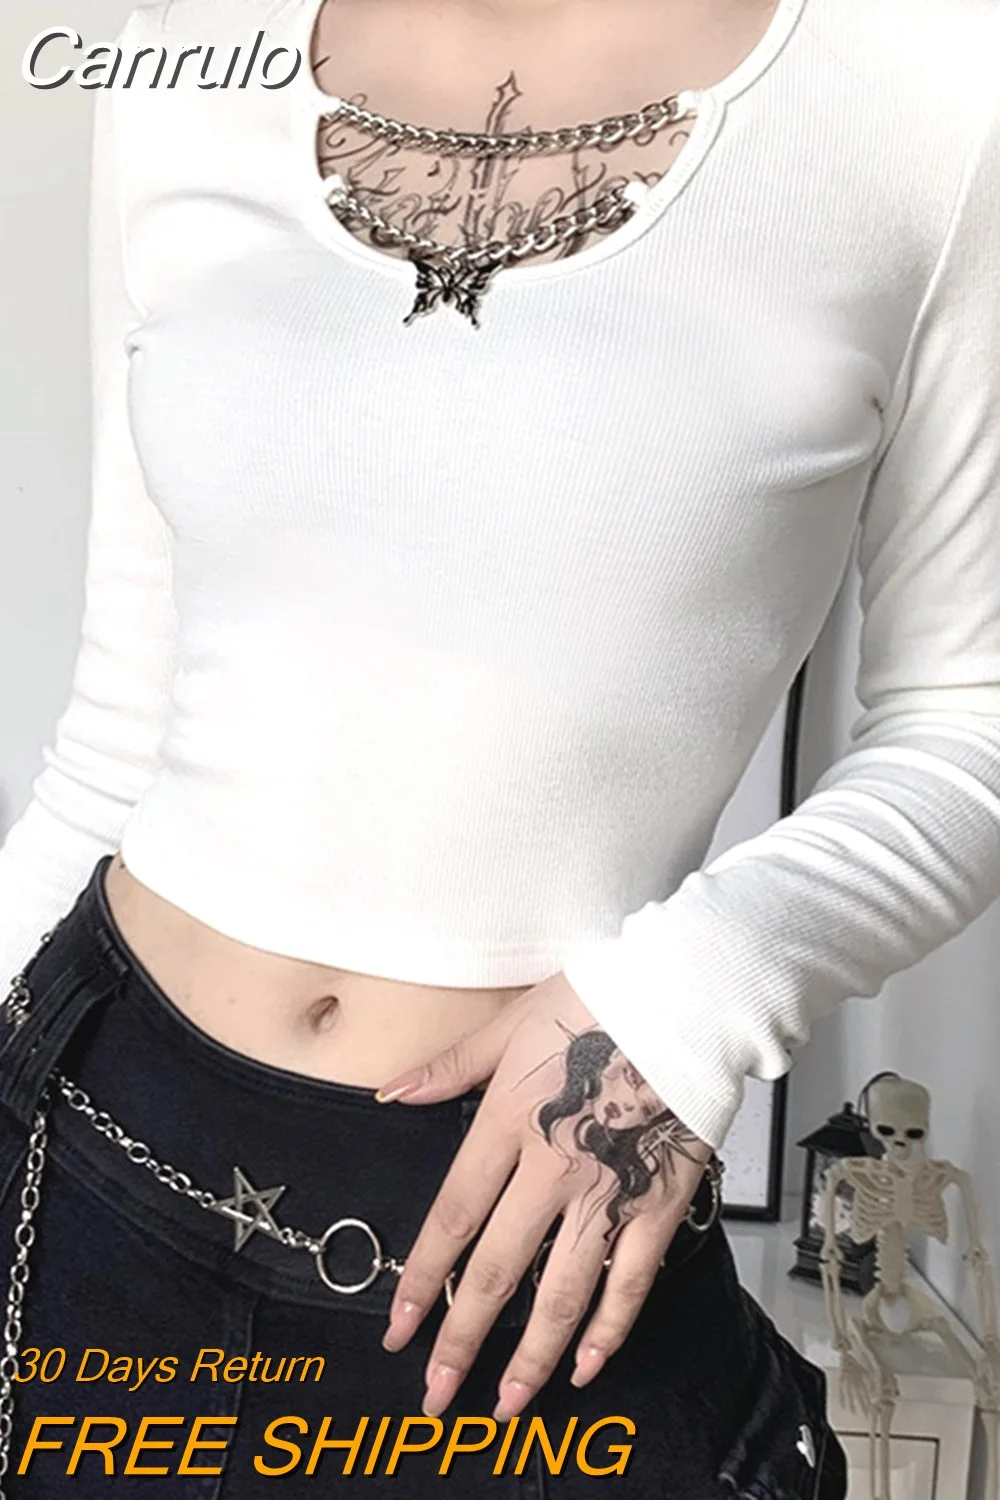 Canrulo Streetwear Punk T-shirt Women Long Sleeve Butterfly Necklace Slim Top Tees Autumn Gothic Bottom T-shirt Black White Emo